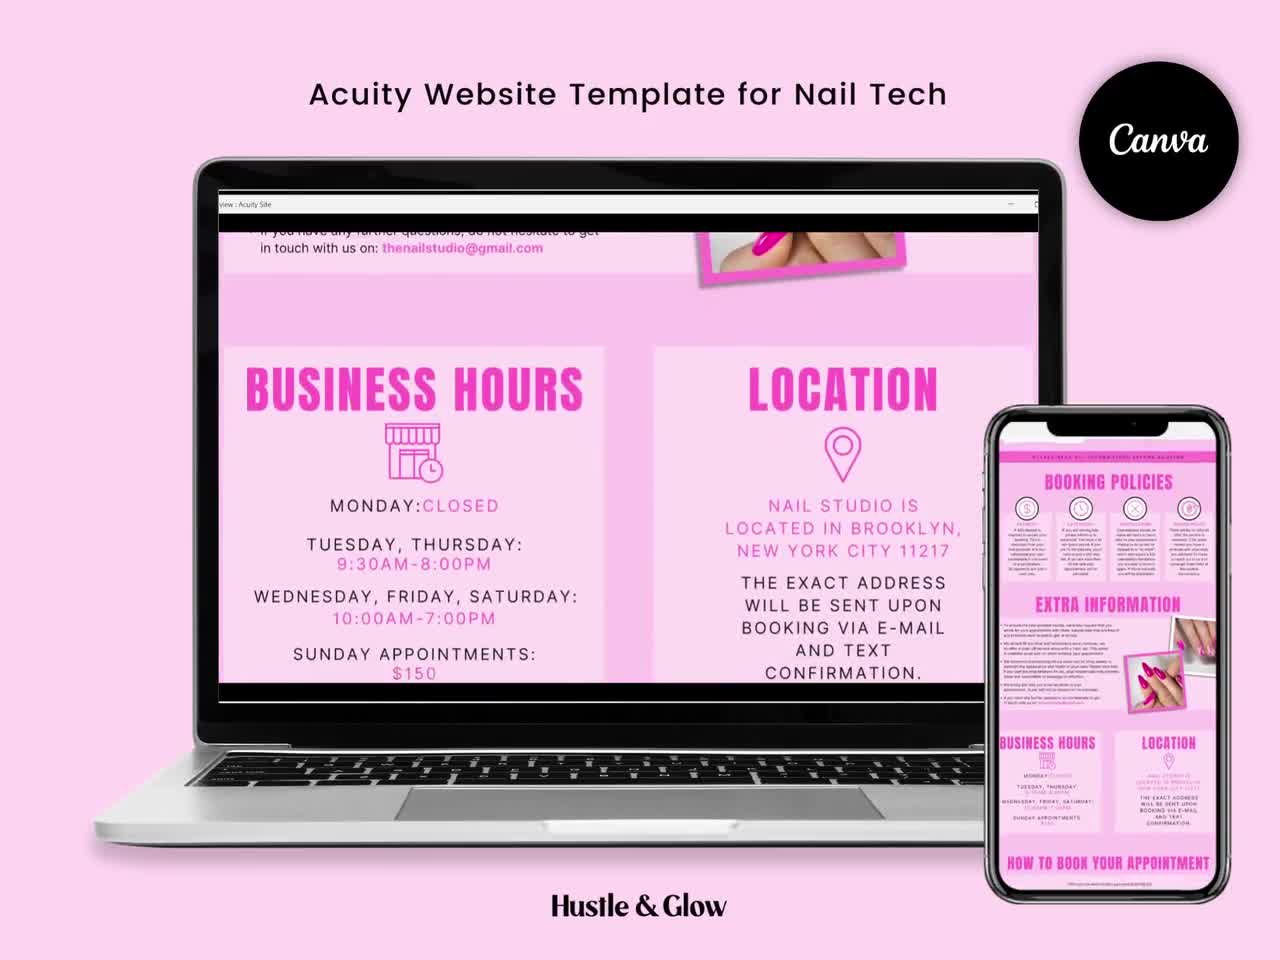 Buy Nail Tech ACUITY SITE DESIGN, Acuity Theme, Premade Website Template,  Editable Template, Service Business, Nail Tech, Makeup Artists Online in  India - Etsy